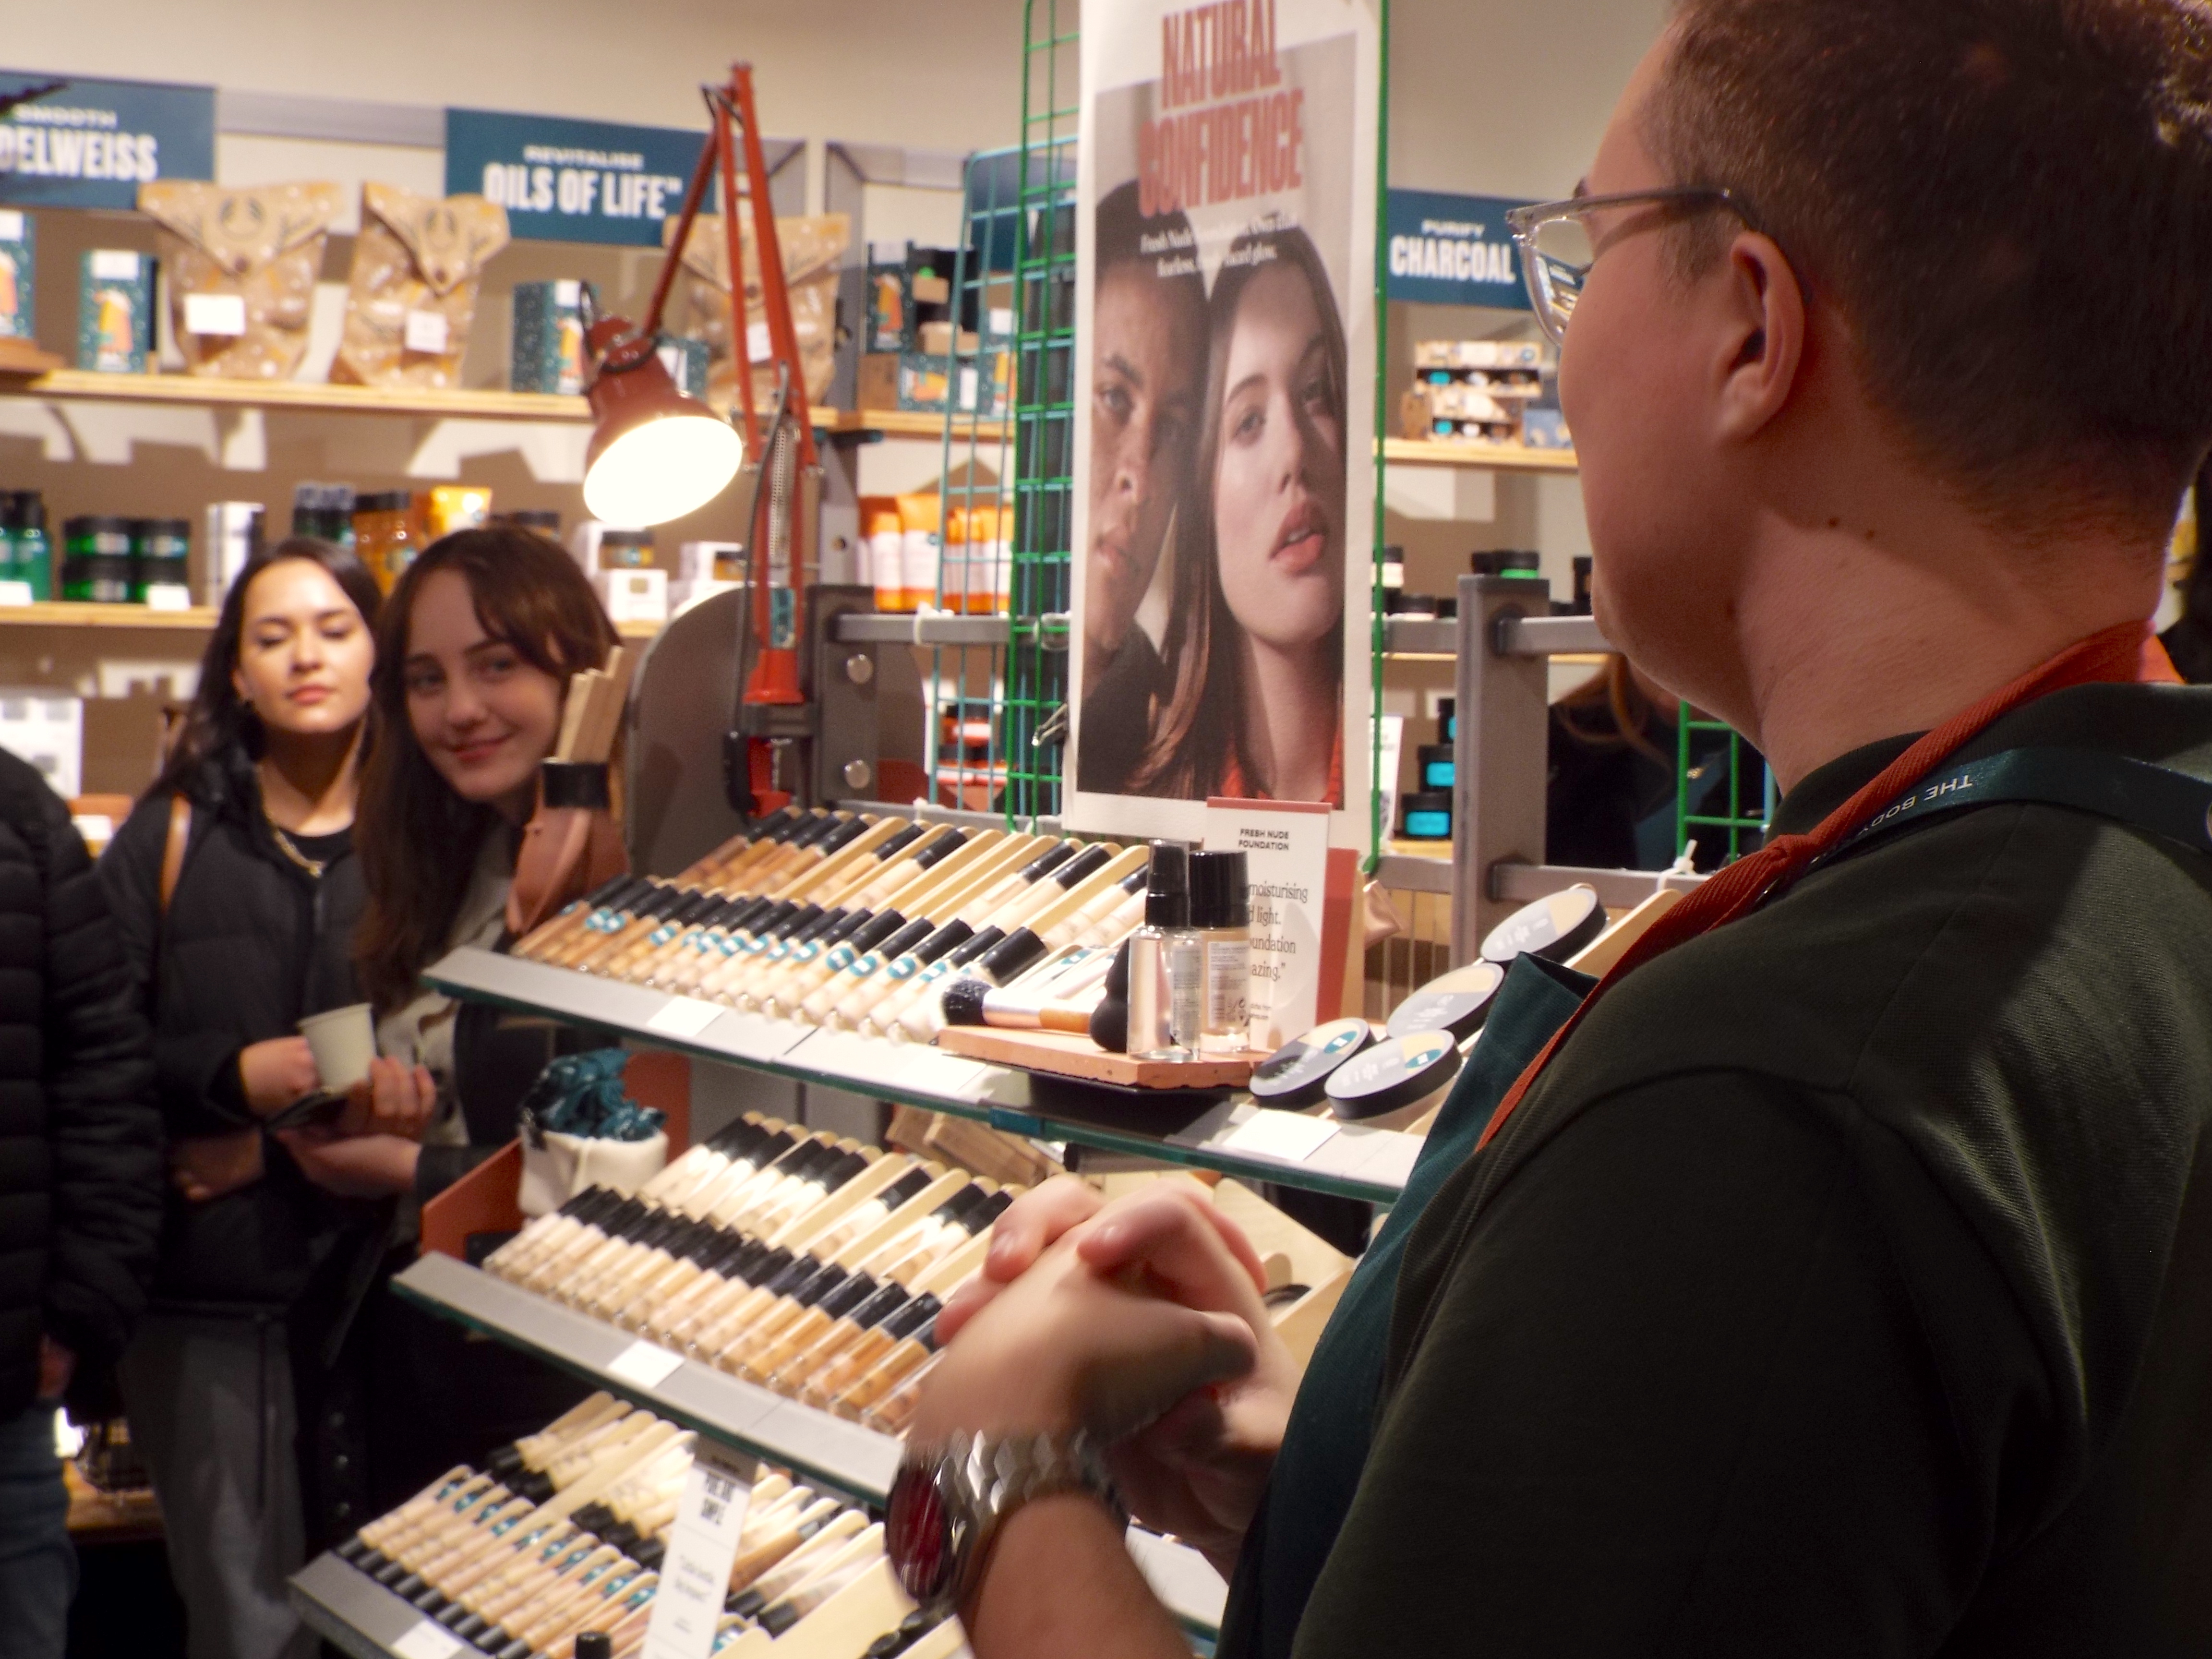 An array of foundations are on display at the new makeup counter, with Ryan stood at the top discussing the new makeup releases and a girl eagerly listens, poking her head around the corner intriguingly.